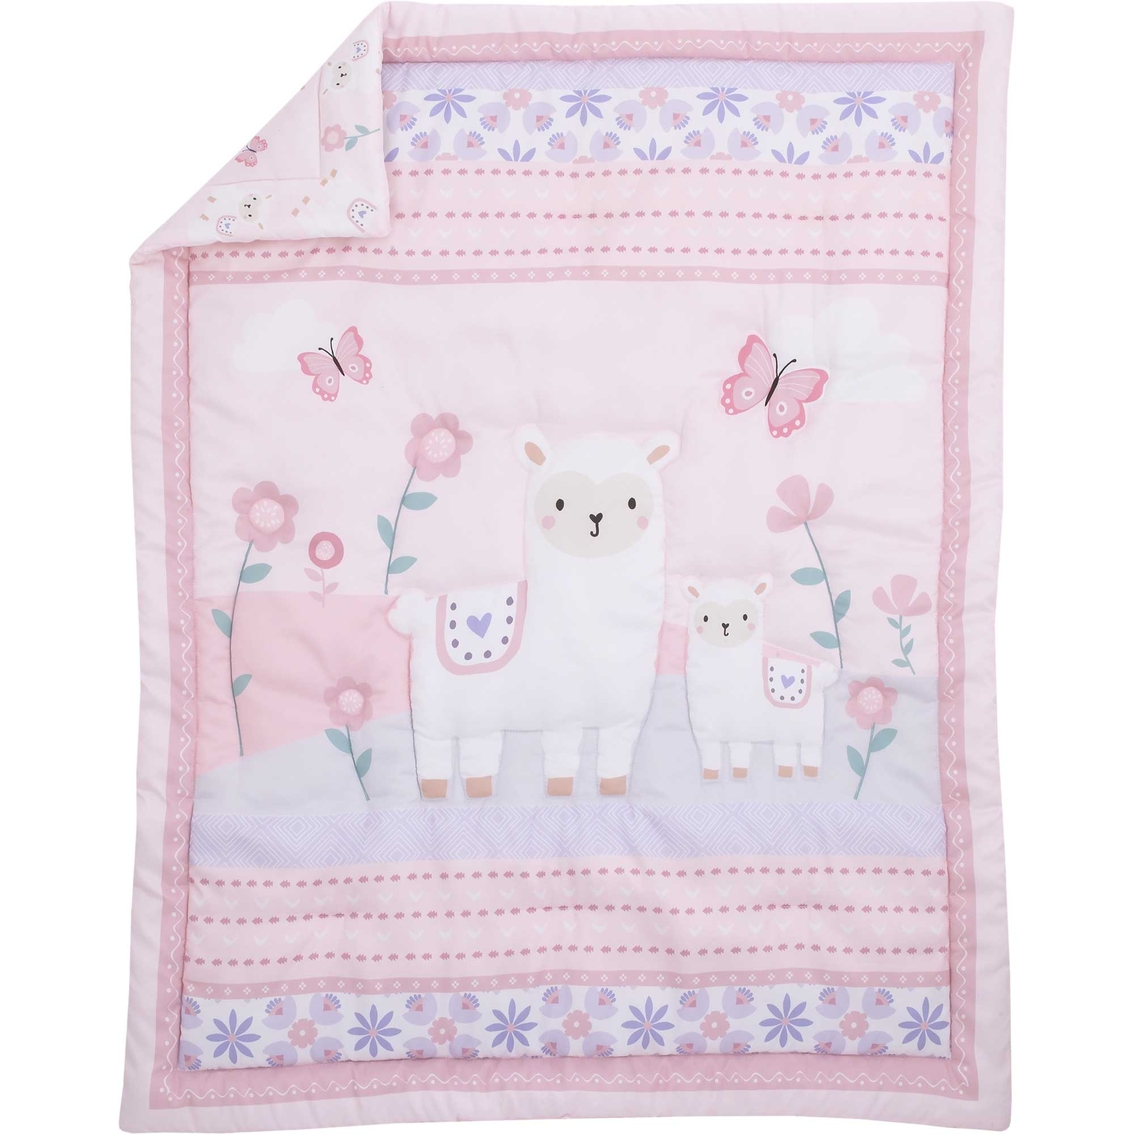 Little Love by NoJo Sweet Llama and Butterflies Mini Crib 3 pc. Bedding Set - Image 3 of 5